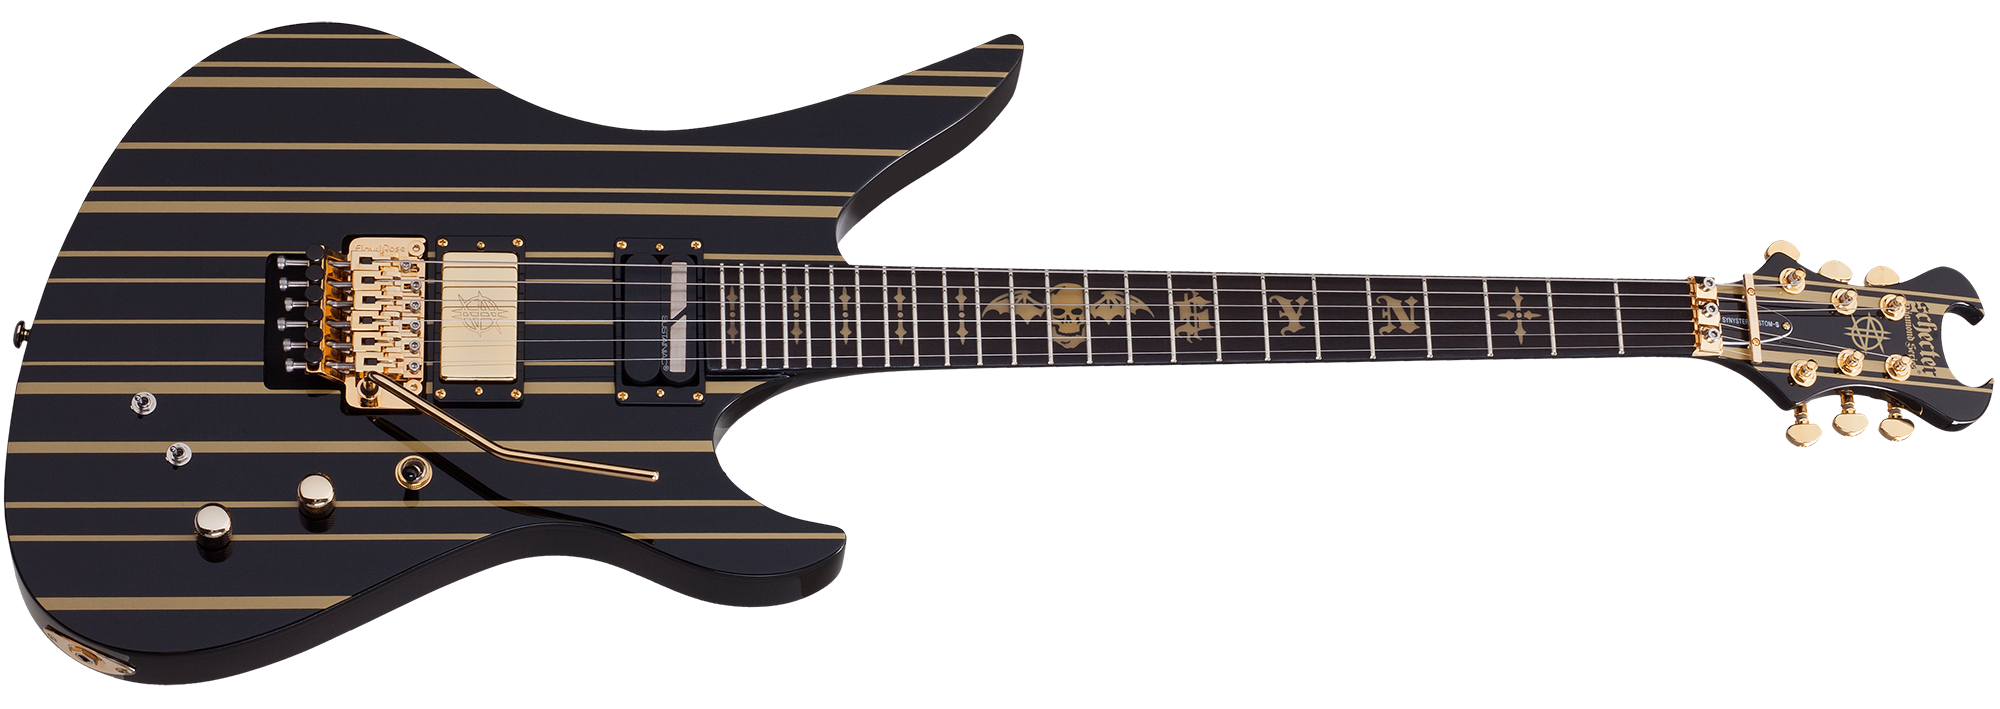 Schecter Synyster Gates Custom-S 6 String Electric Guitar - Black/Gold Stripes 1742-SHC - The Guitar World